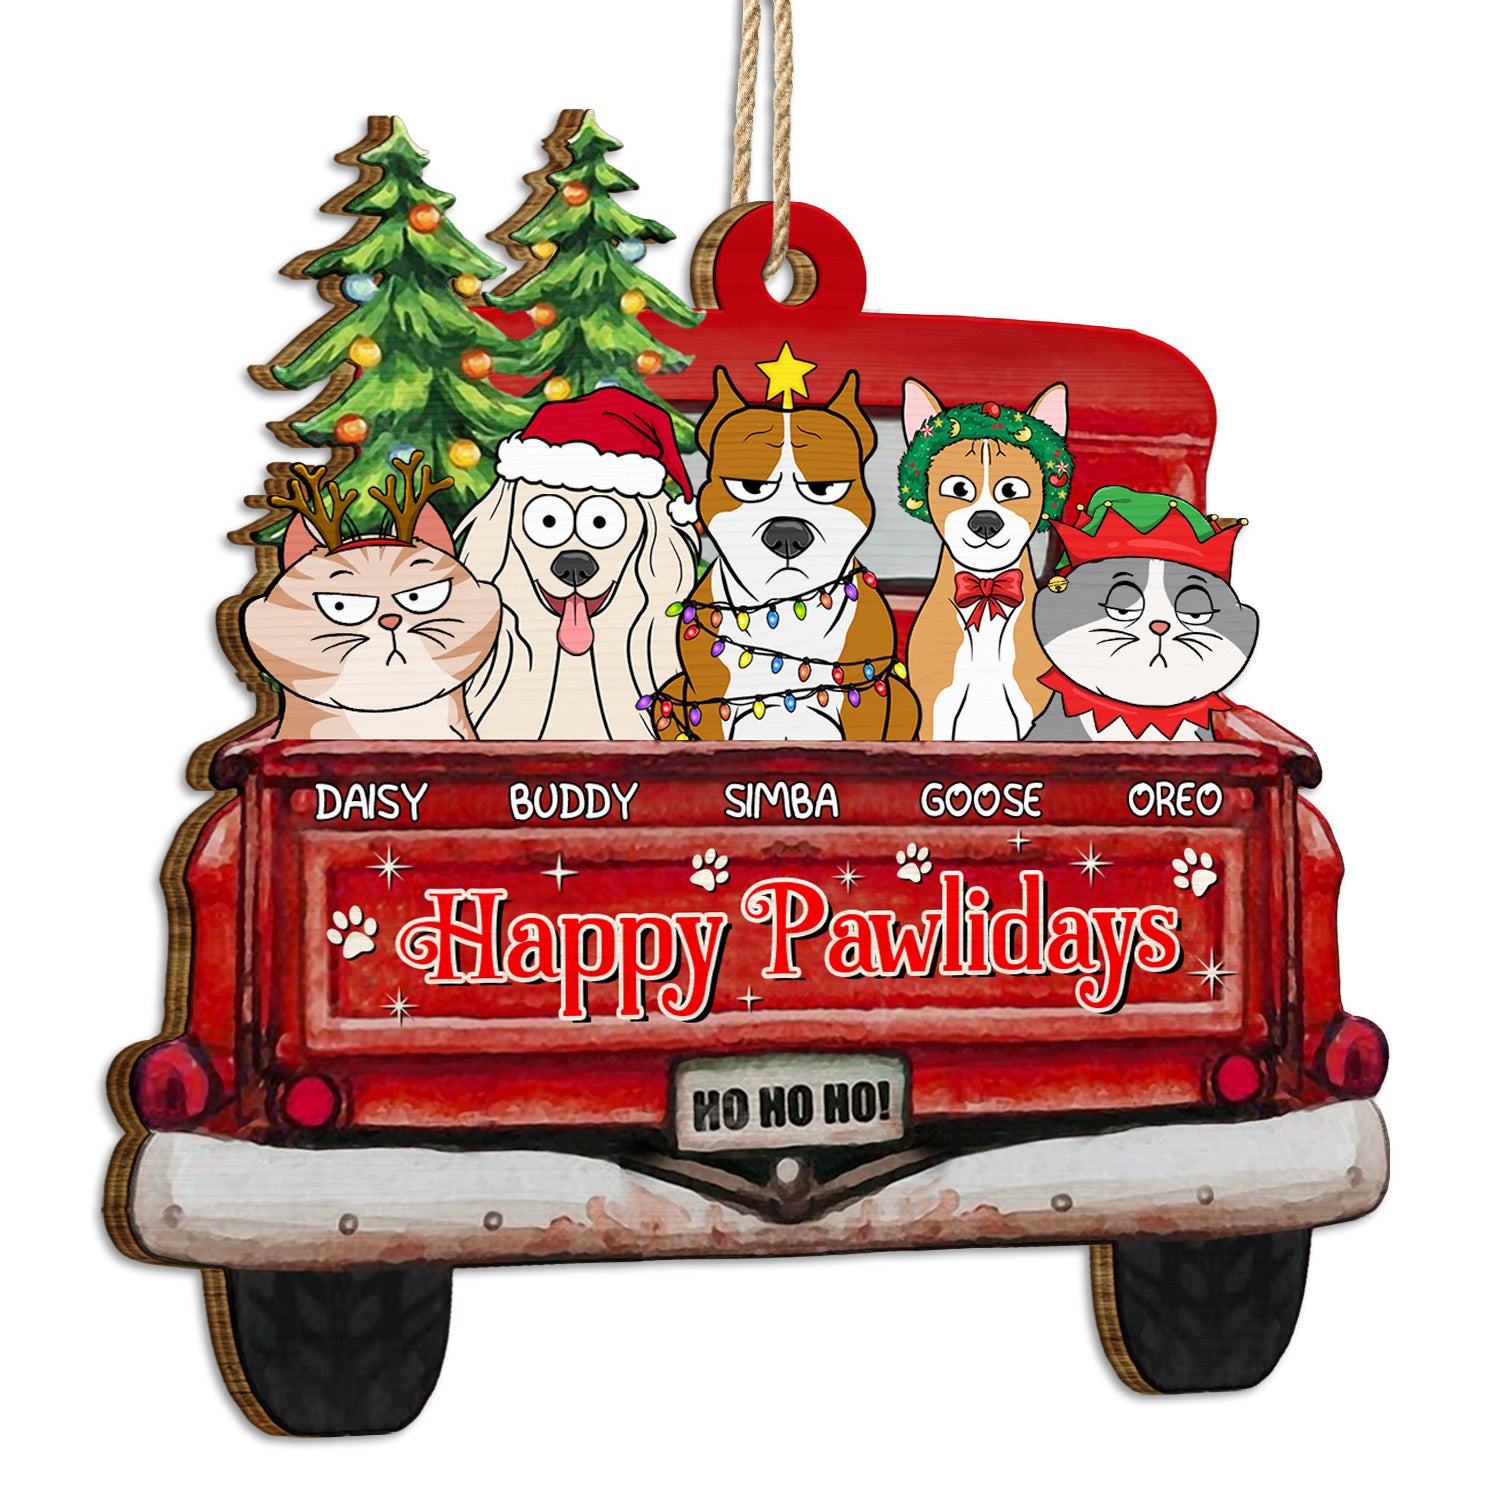 Happy Pawlidays - Christmas Gift For Dog, Cat, Pet Lovers - Personalized Wooden Cutout Ornament